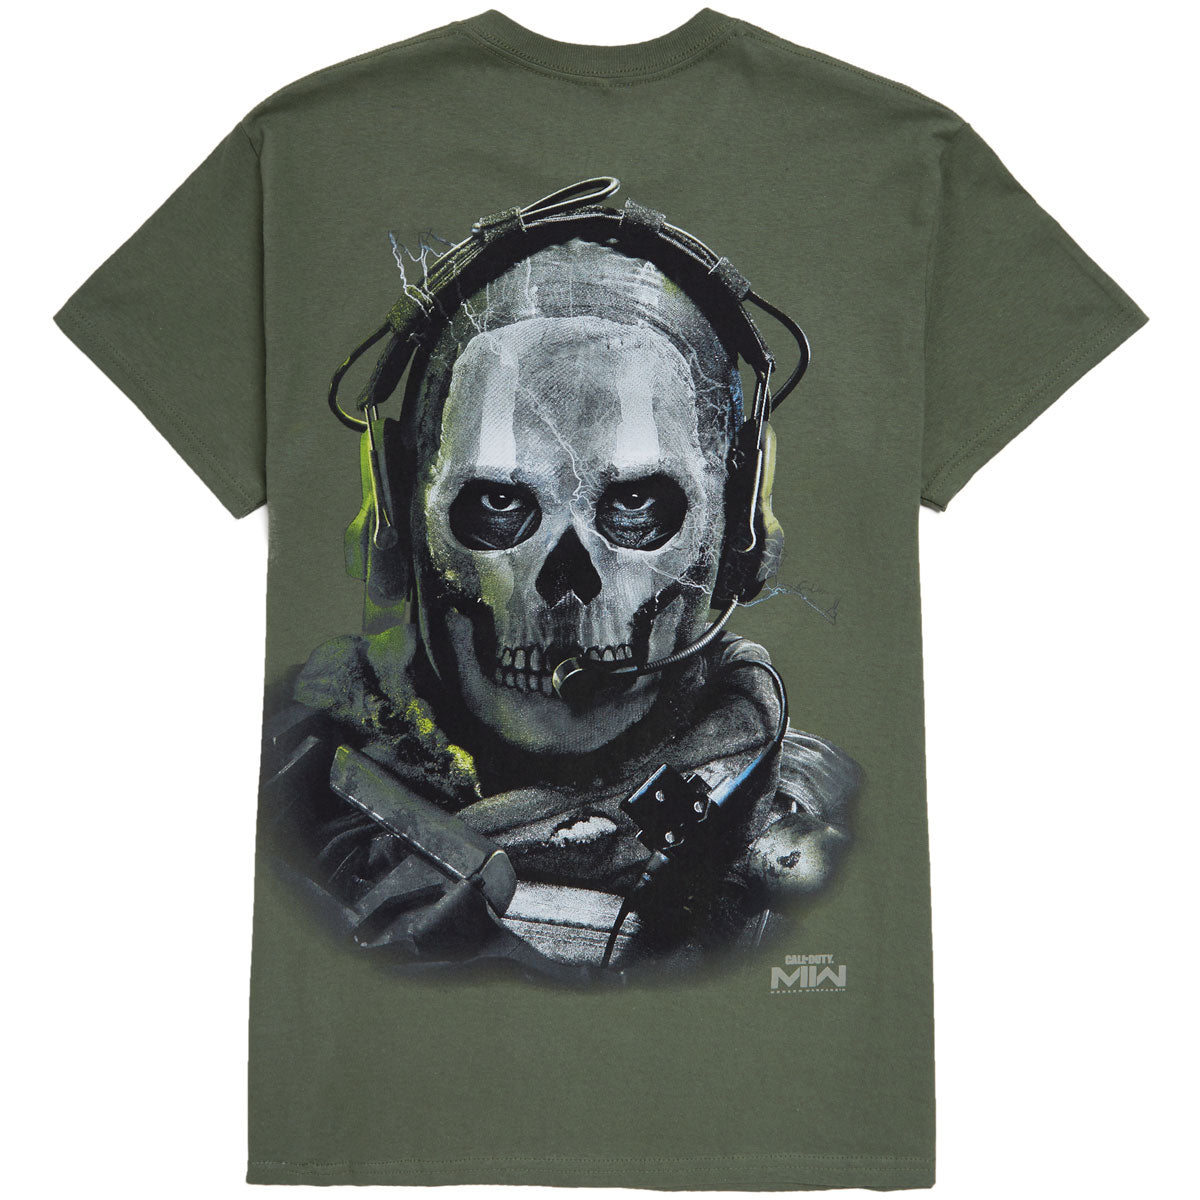 Primitive x Call Of Duty Ghost T-Shirt - Military Green image 1